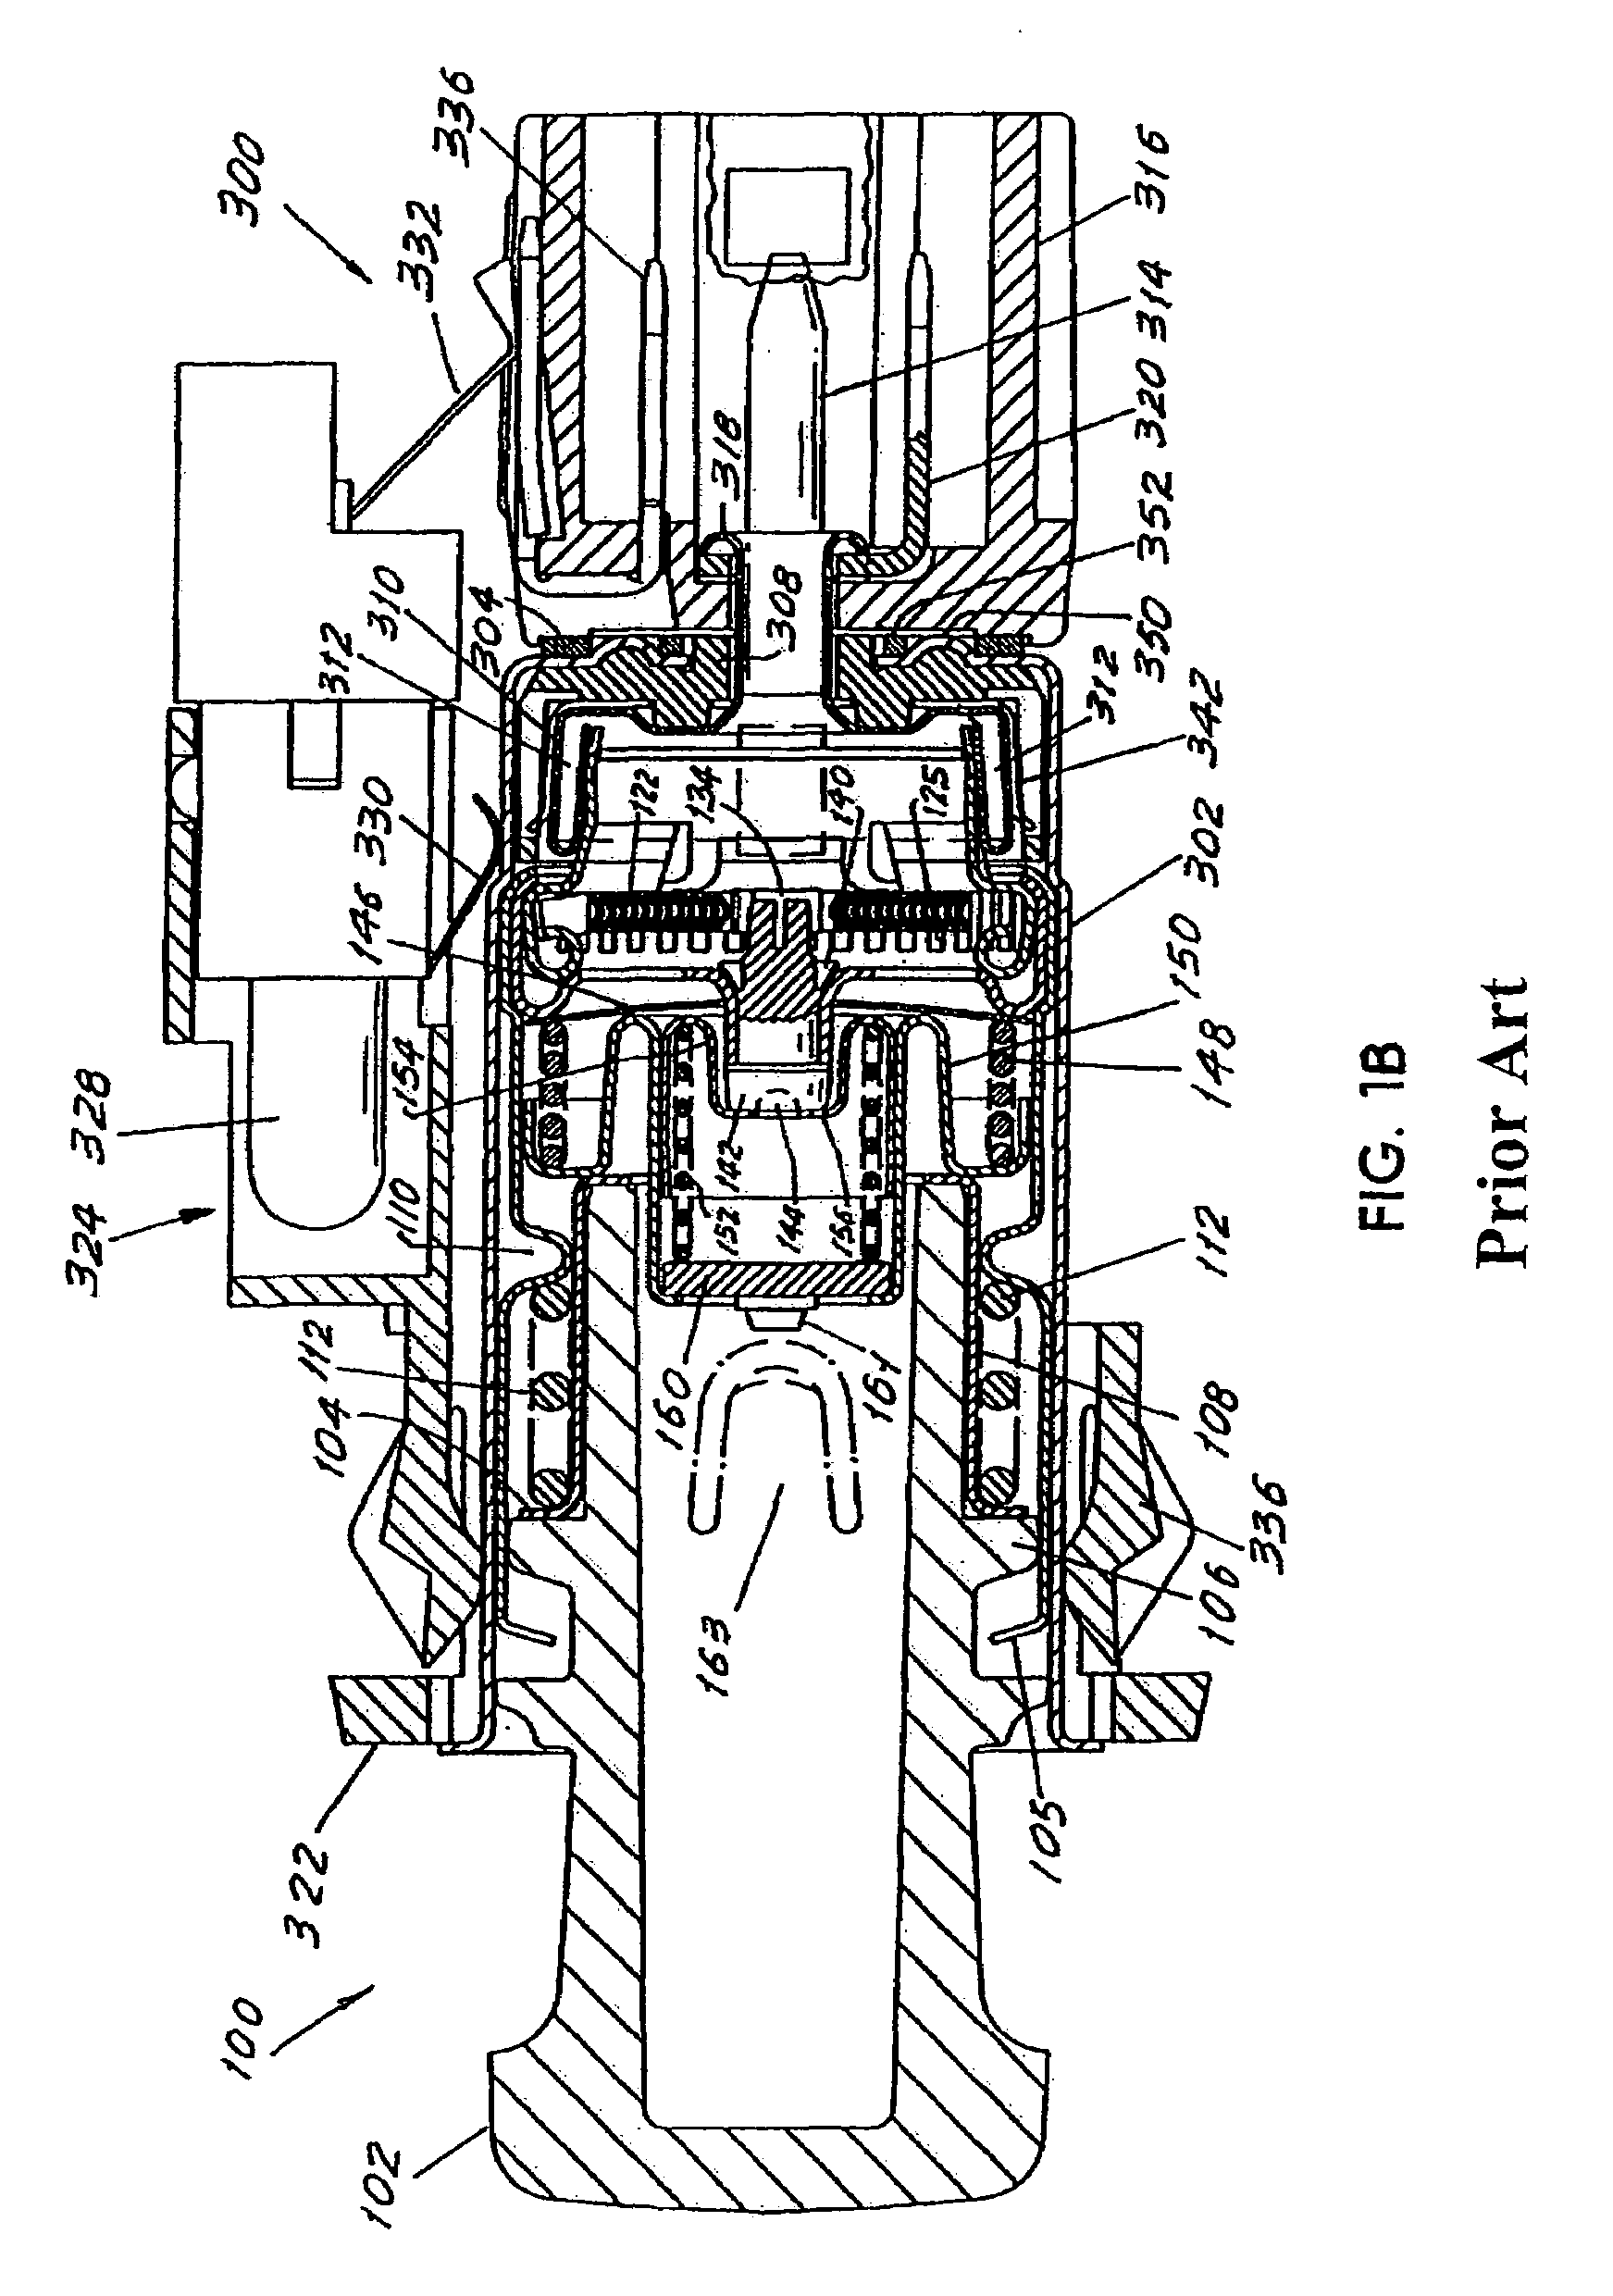 Double-disk assembly for a cigar or cigarette lighter